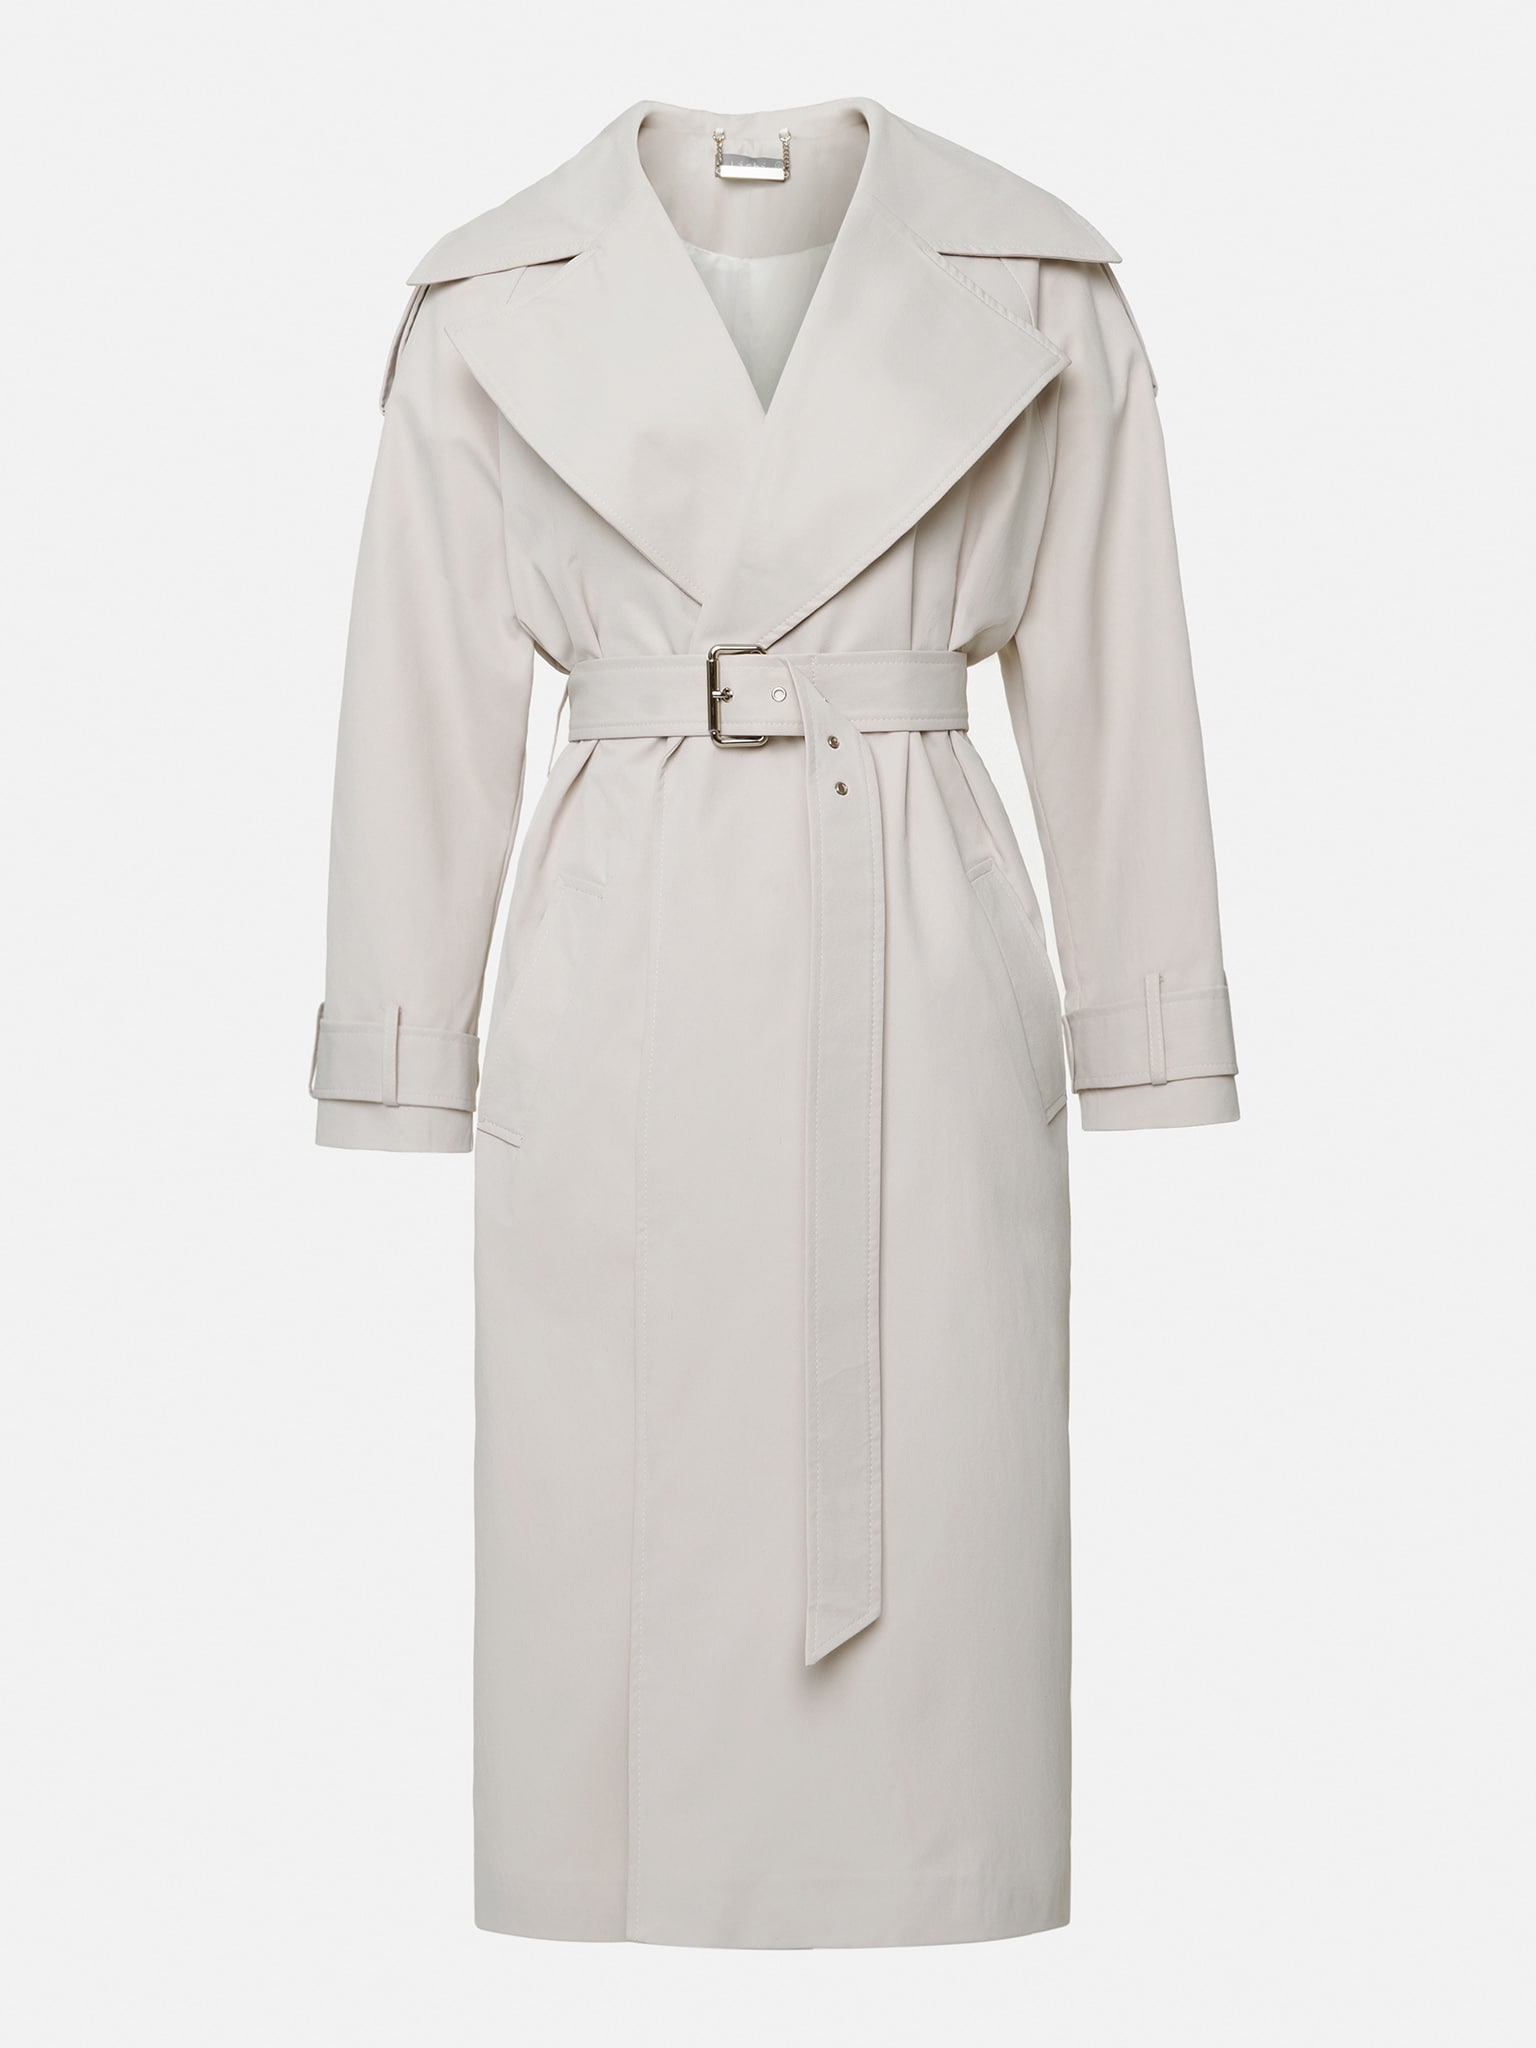 Oversized double-breasted trench coat